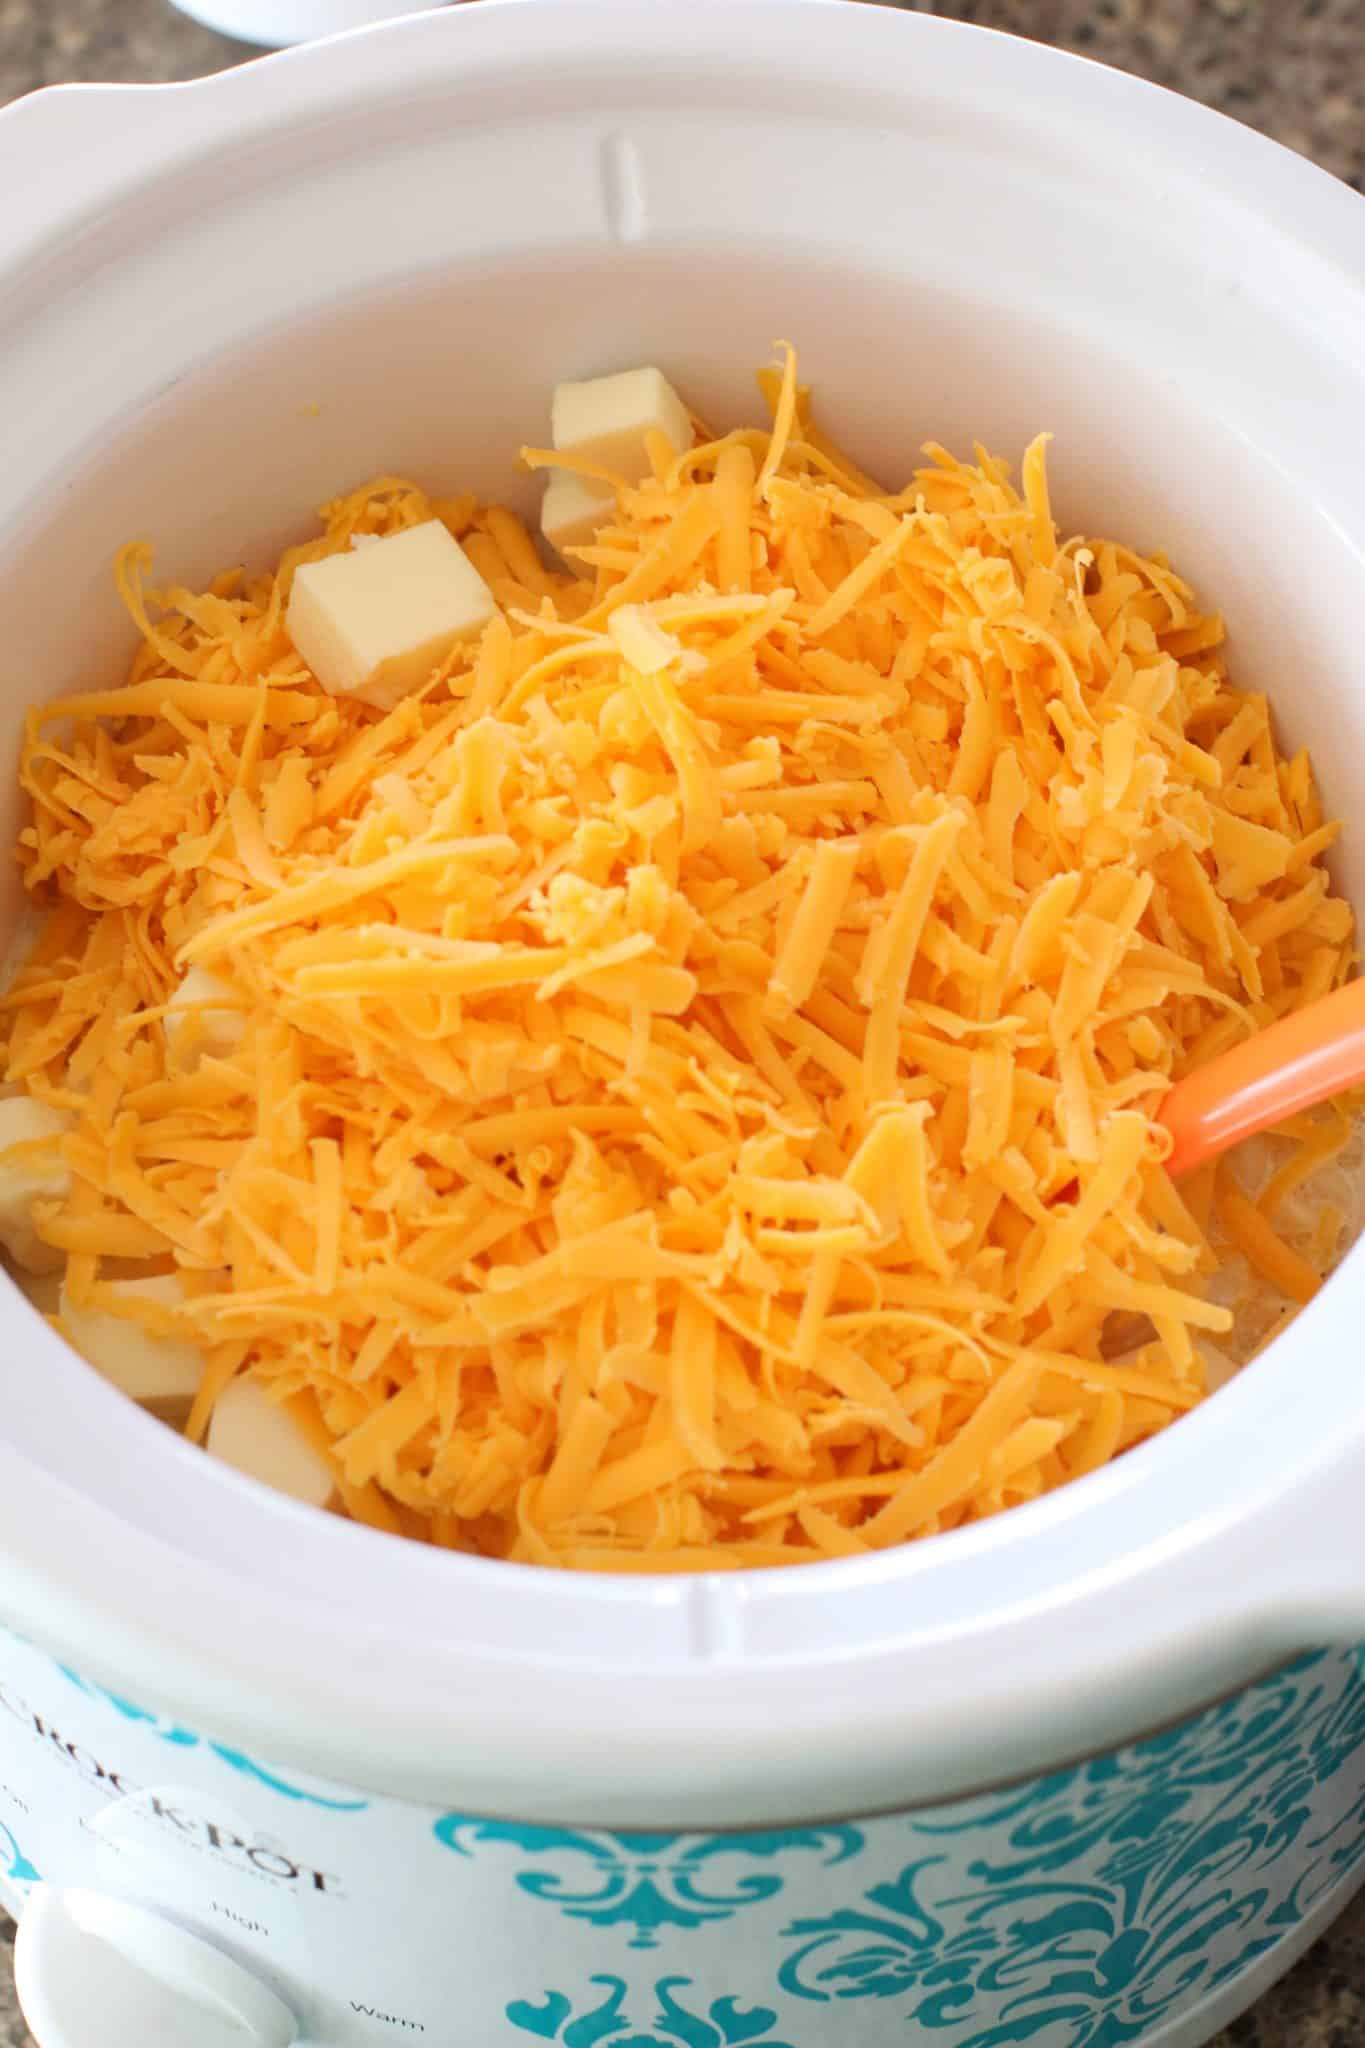 freshly shredded cheddar cheese added to slow cooker.